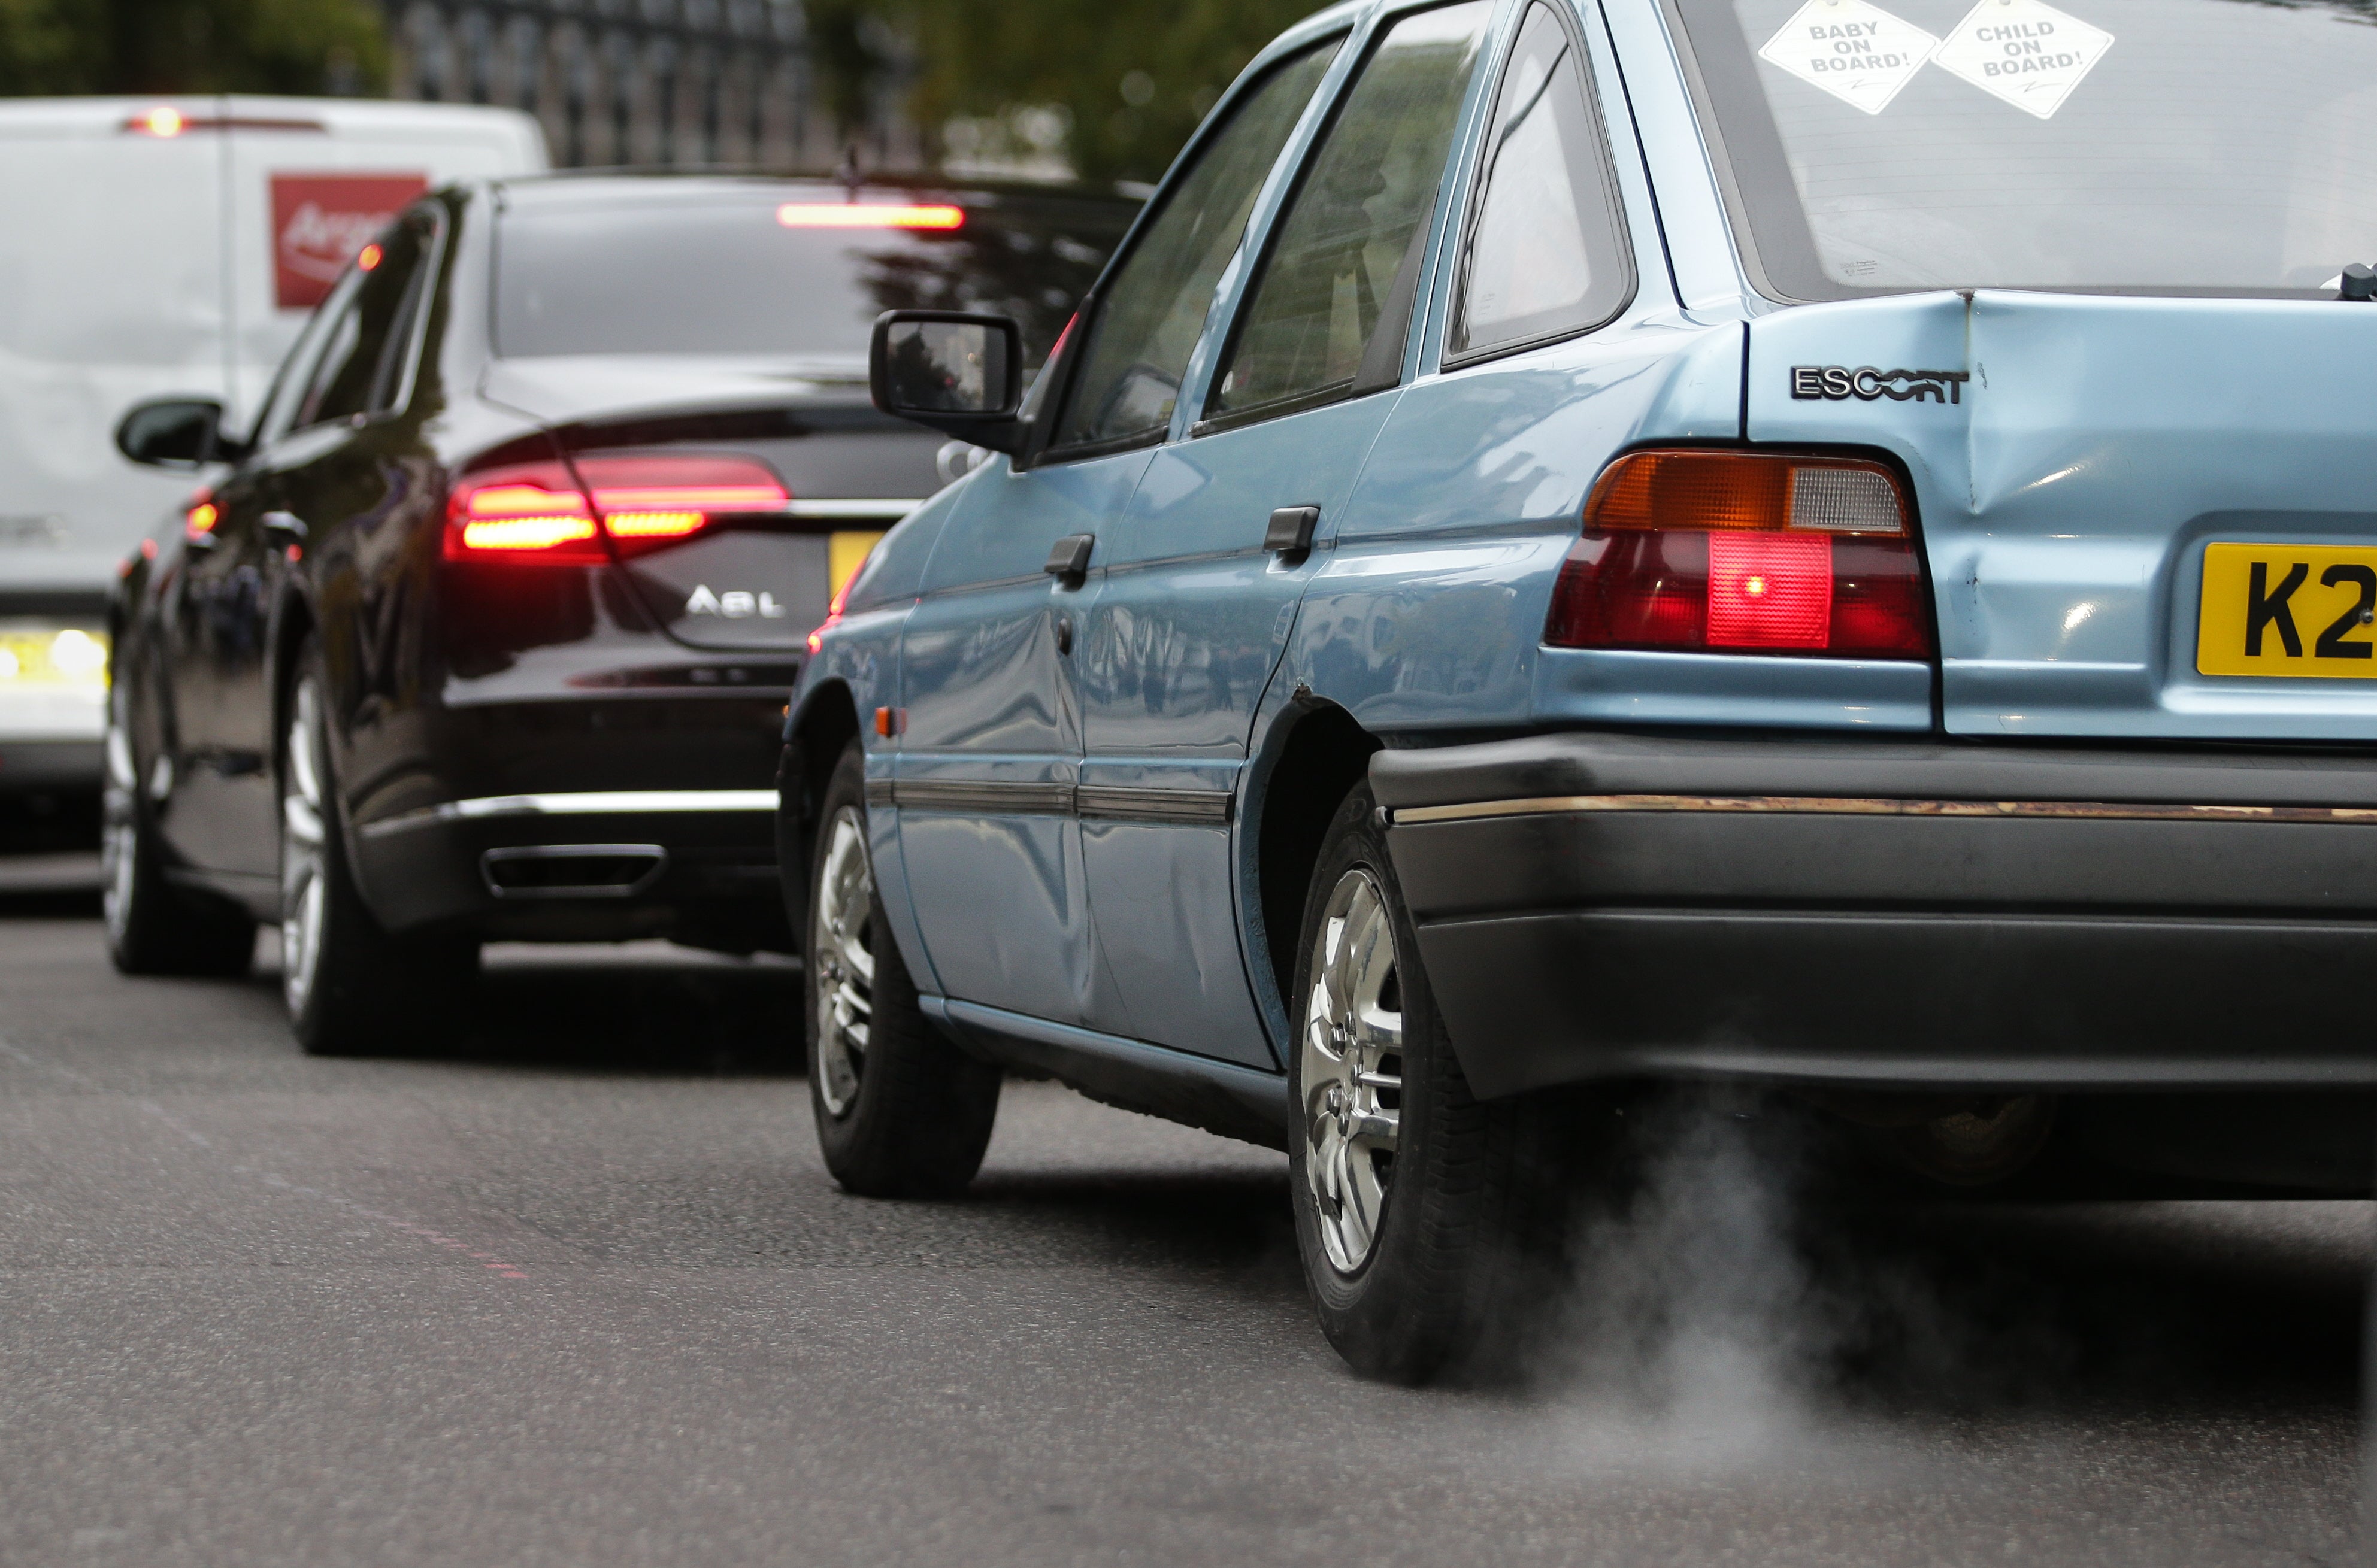 A new study has found a link between a person’s exposure to air pollution and the severity with which they will experience the effects of Covid-19